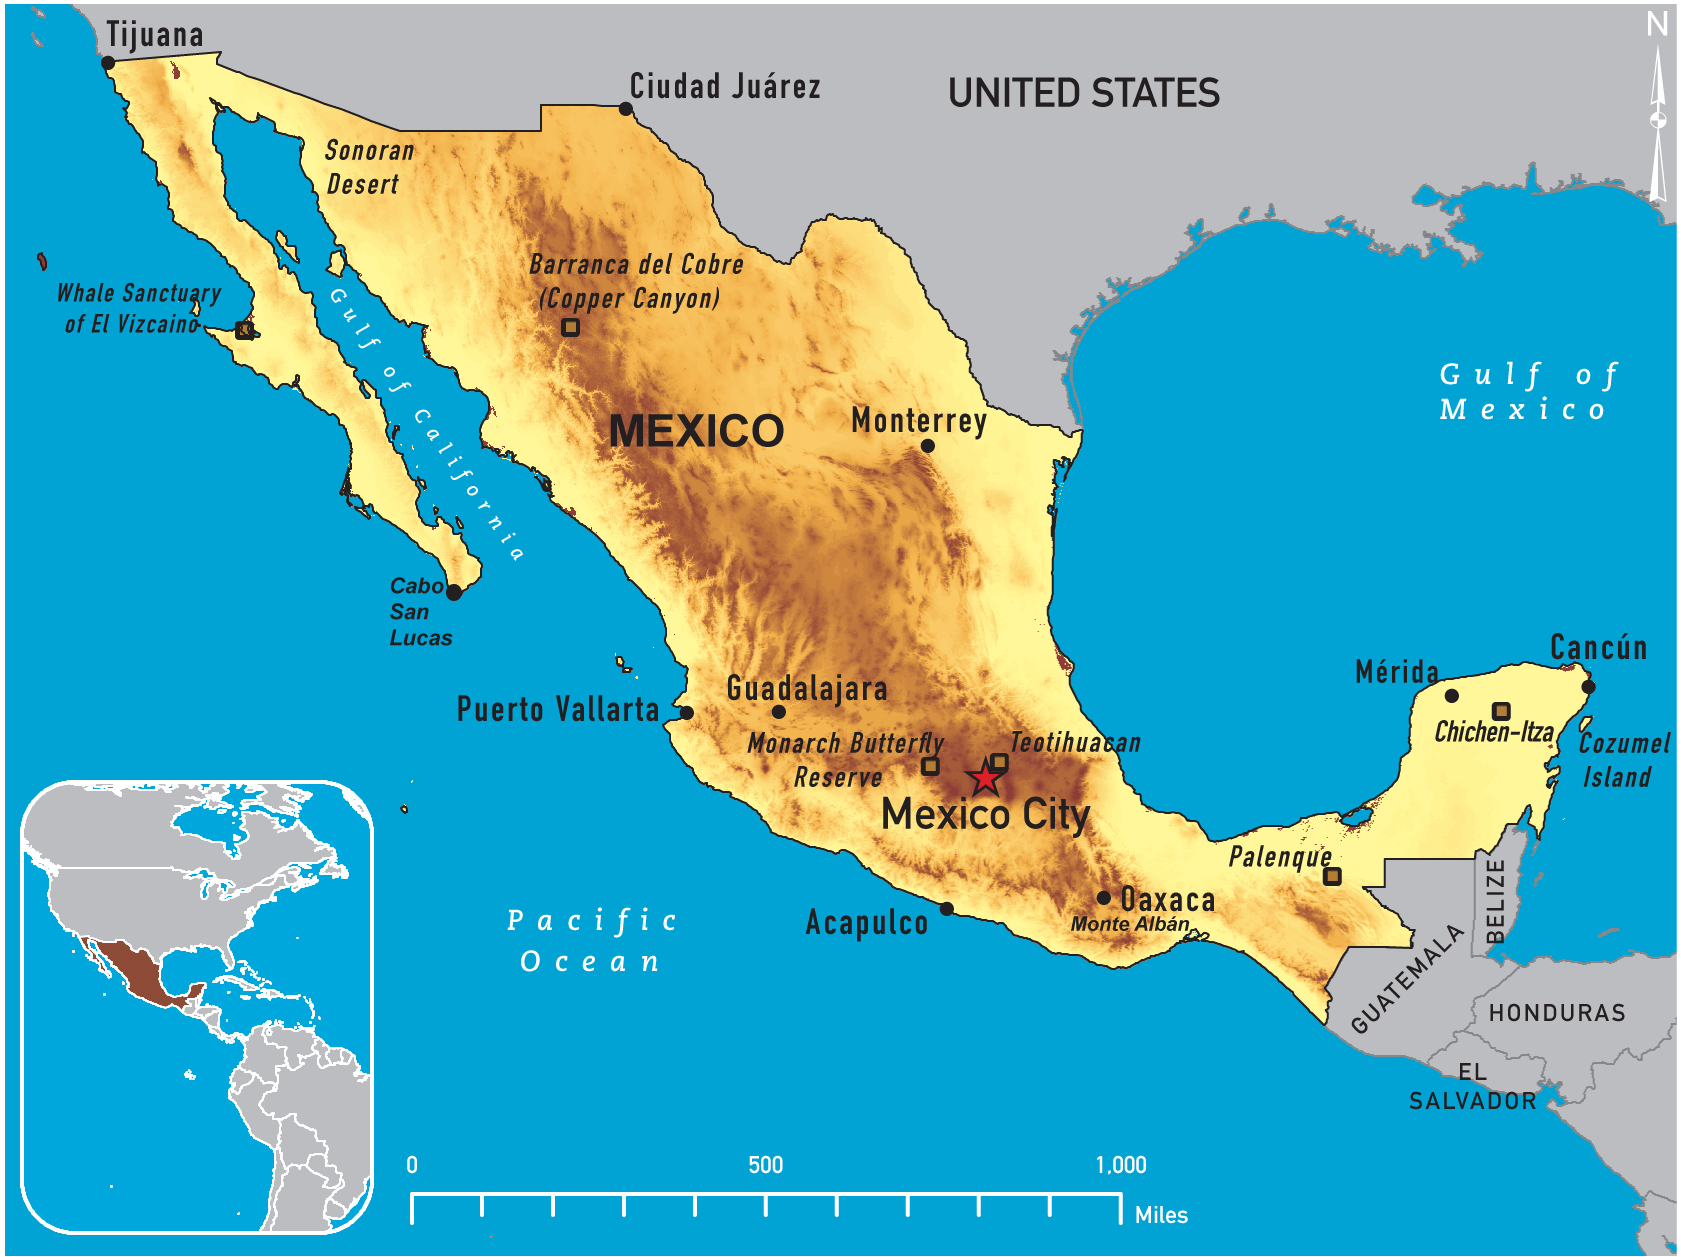 mexican revolution map